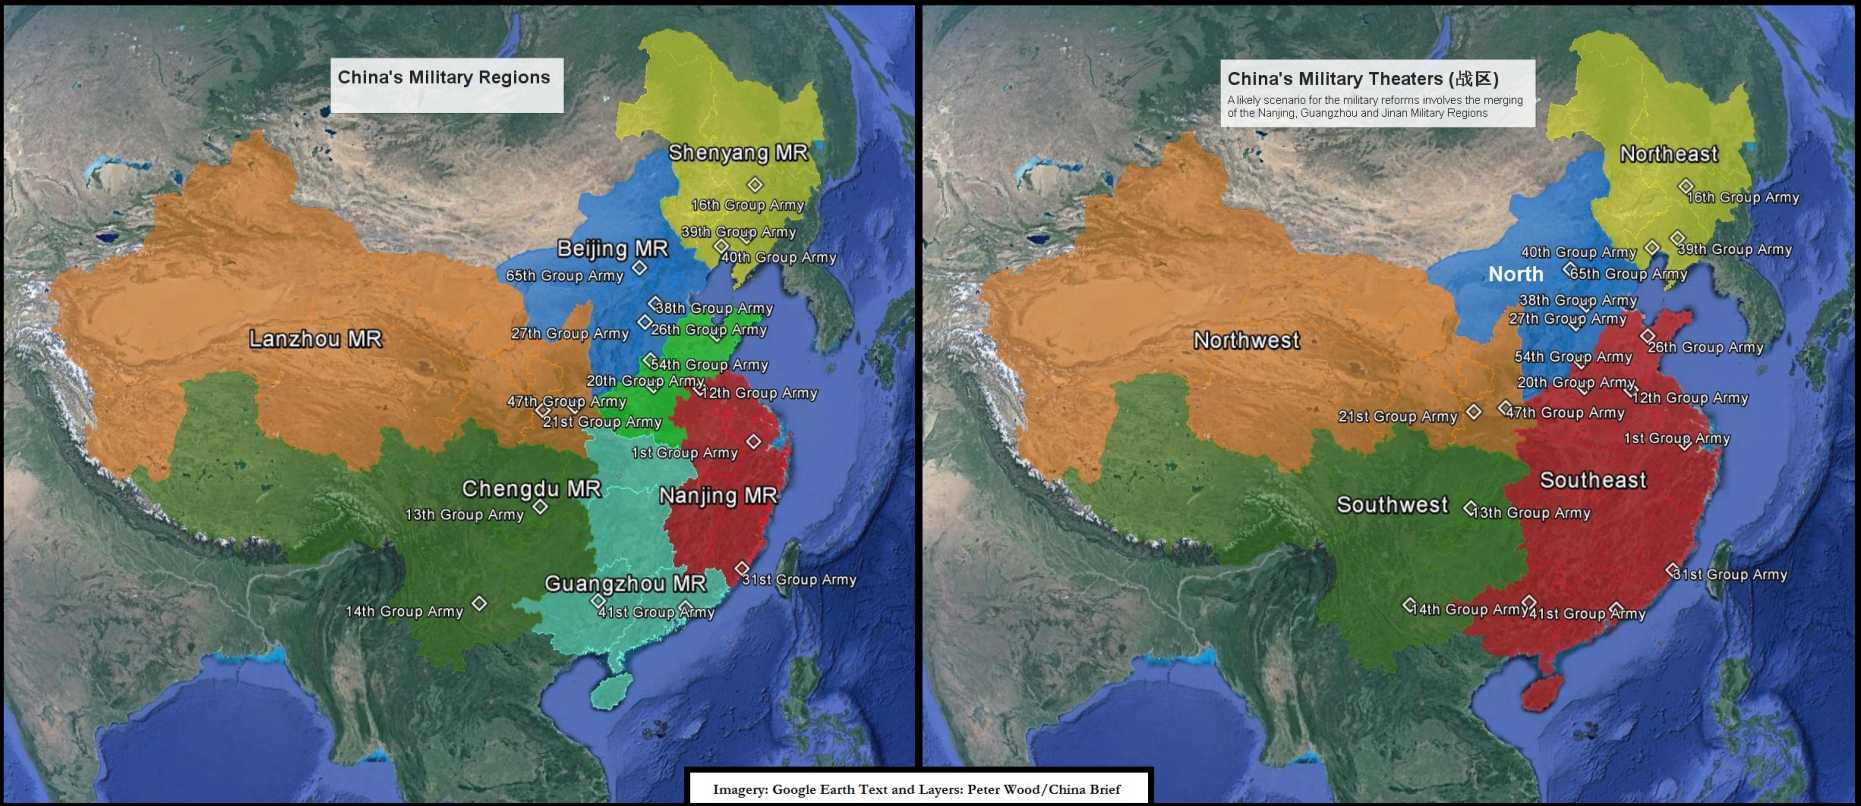 Enlarged view: China's Current Military Regions and a Proposed Reorganization into Military Theaters.